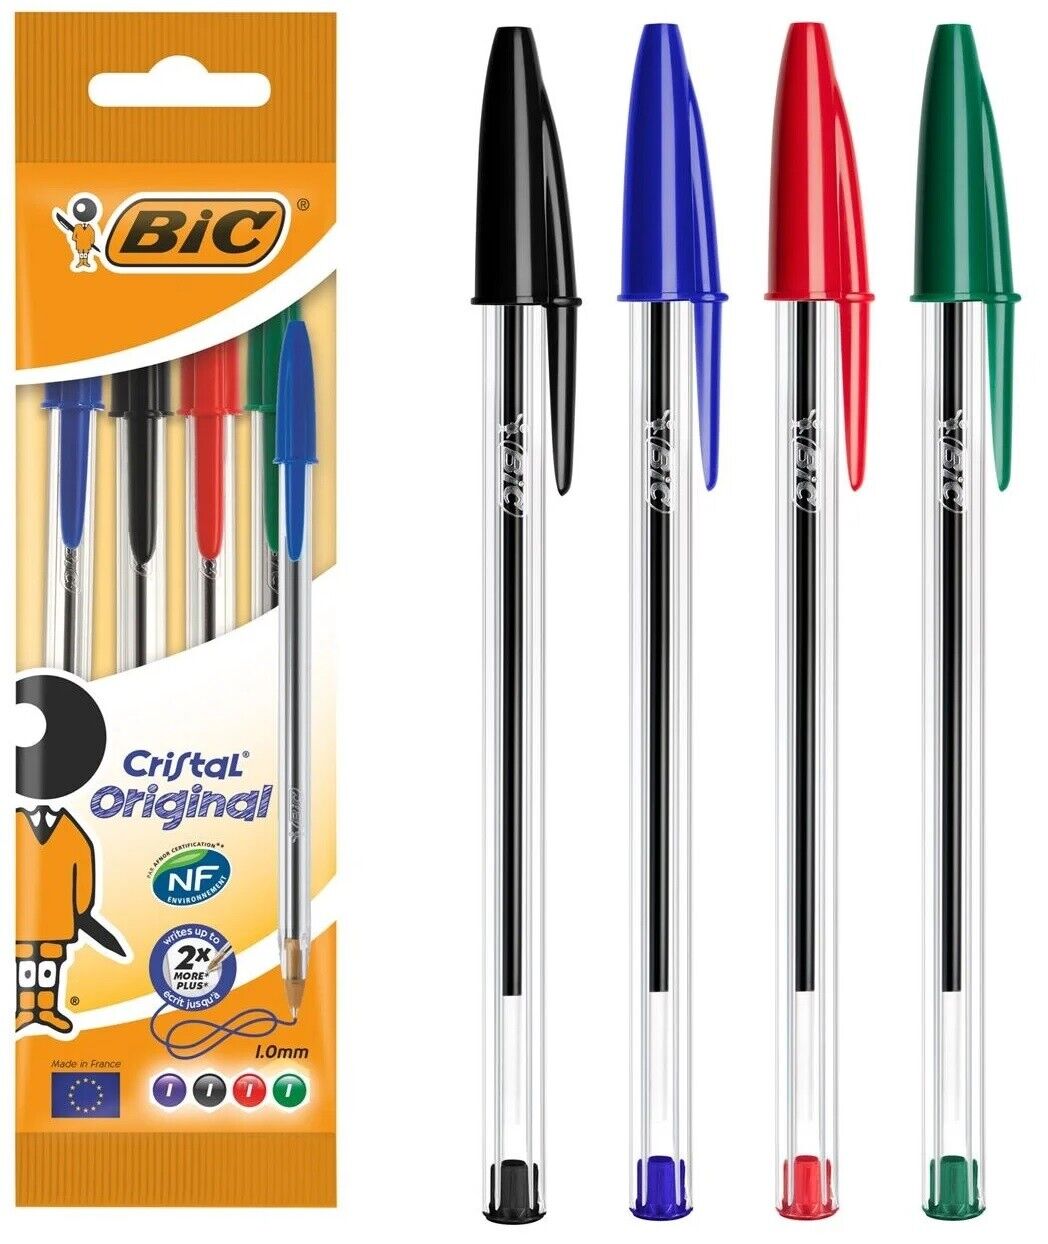 was Sneeuwwitje barbecue BIC CRISTAL CLASSIC BALL POINT ASSORTED COLOR PENS PACK OF 4 PENS | eBay